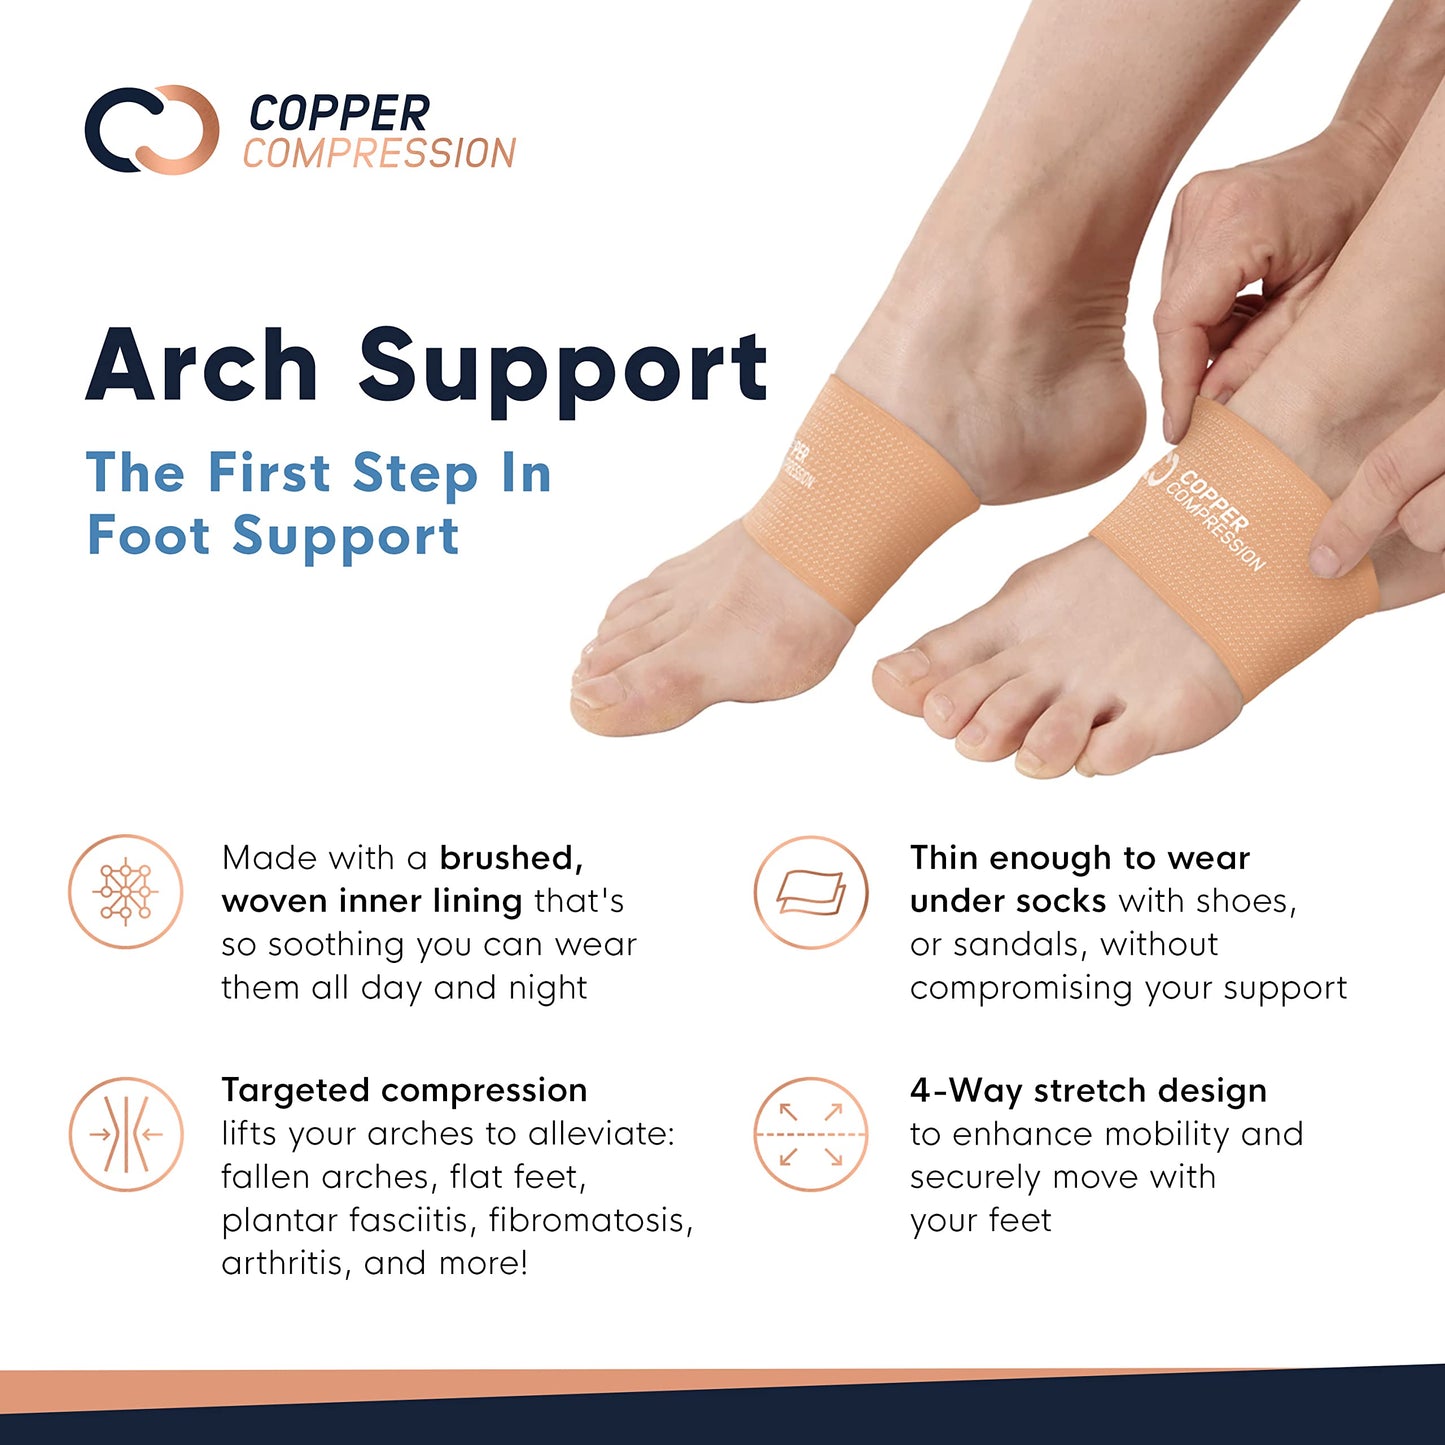 Copper Compression Arch Support - 2 Pain Relief Foot Care Brace Sleeves for Plantar Fasciitis, Heel Spurs - Wide Narrow Feet - Flat & Fallen Arches, High Arch - One Size - 1 Pair - Nude